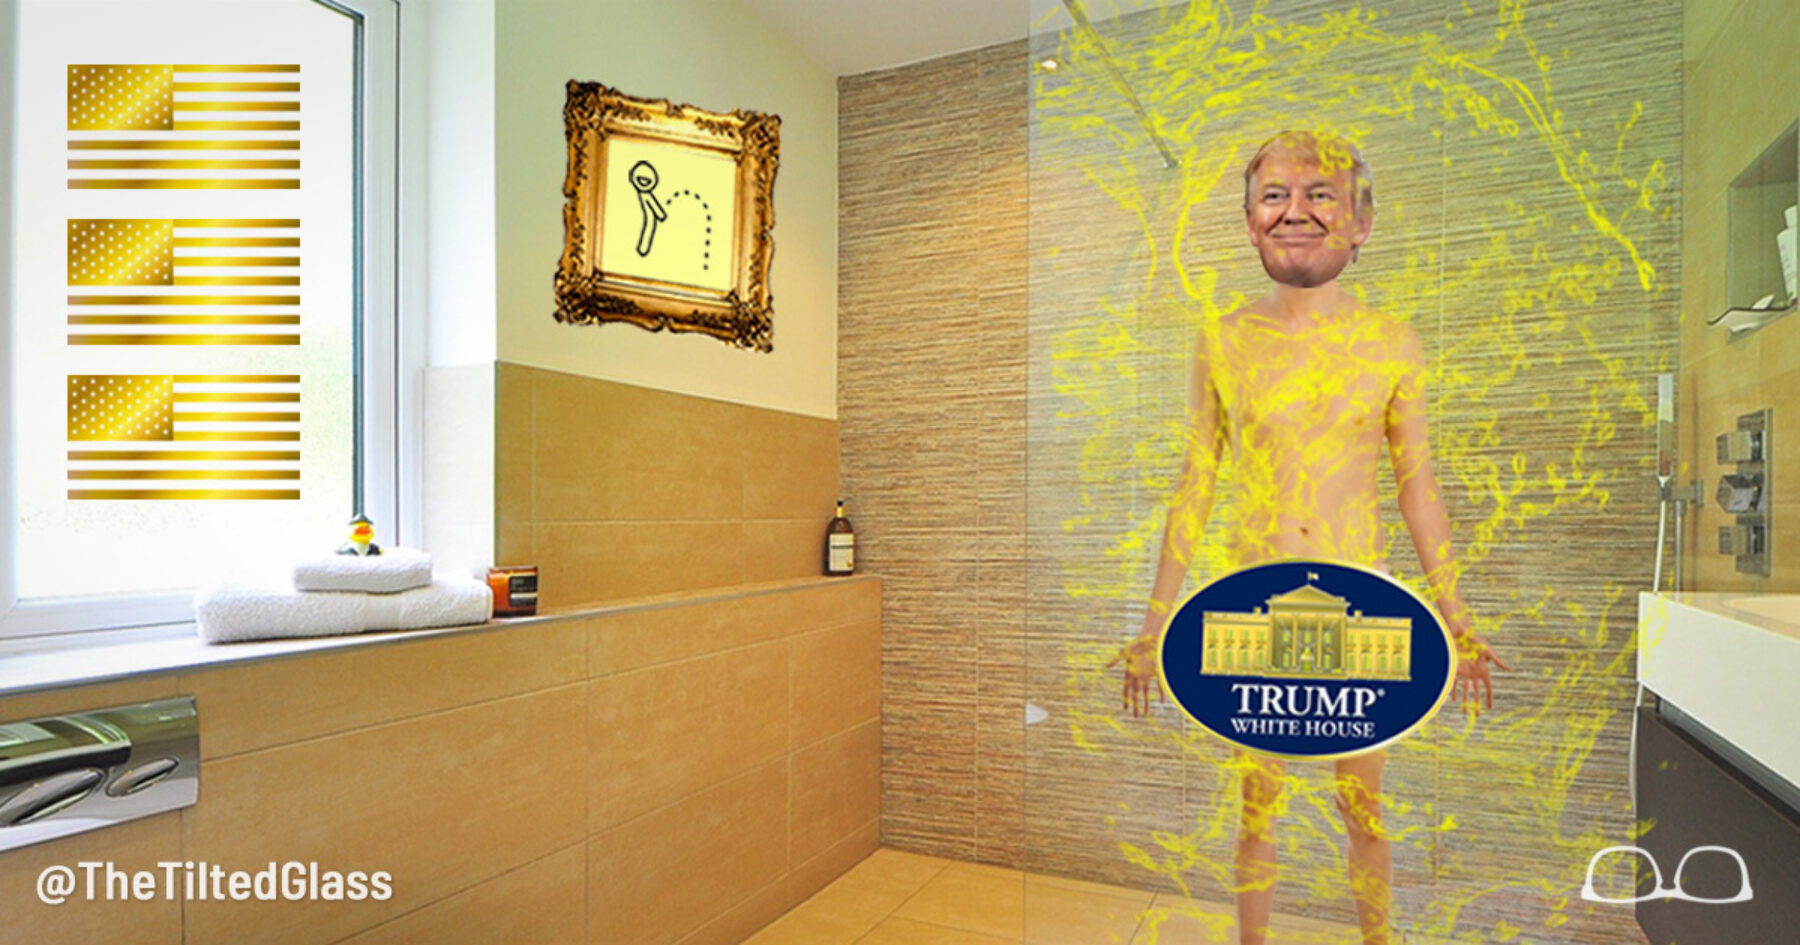 Trump Orders Golden Showers Installed in White House